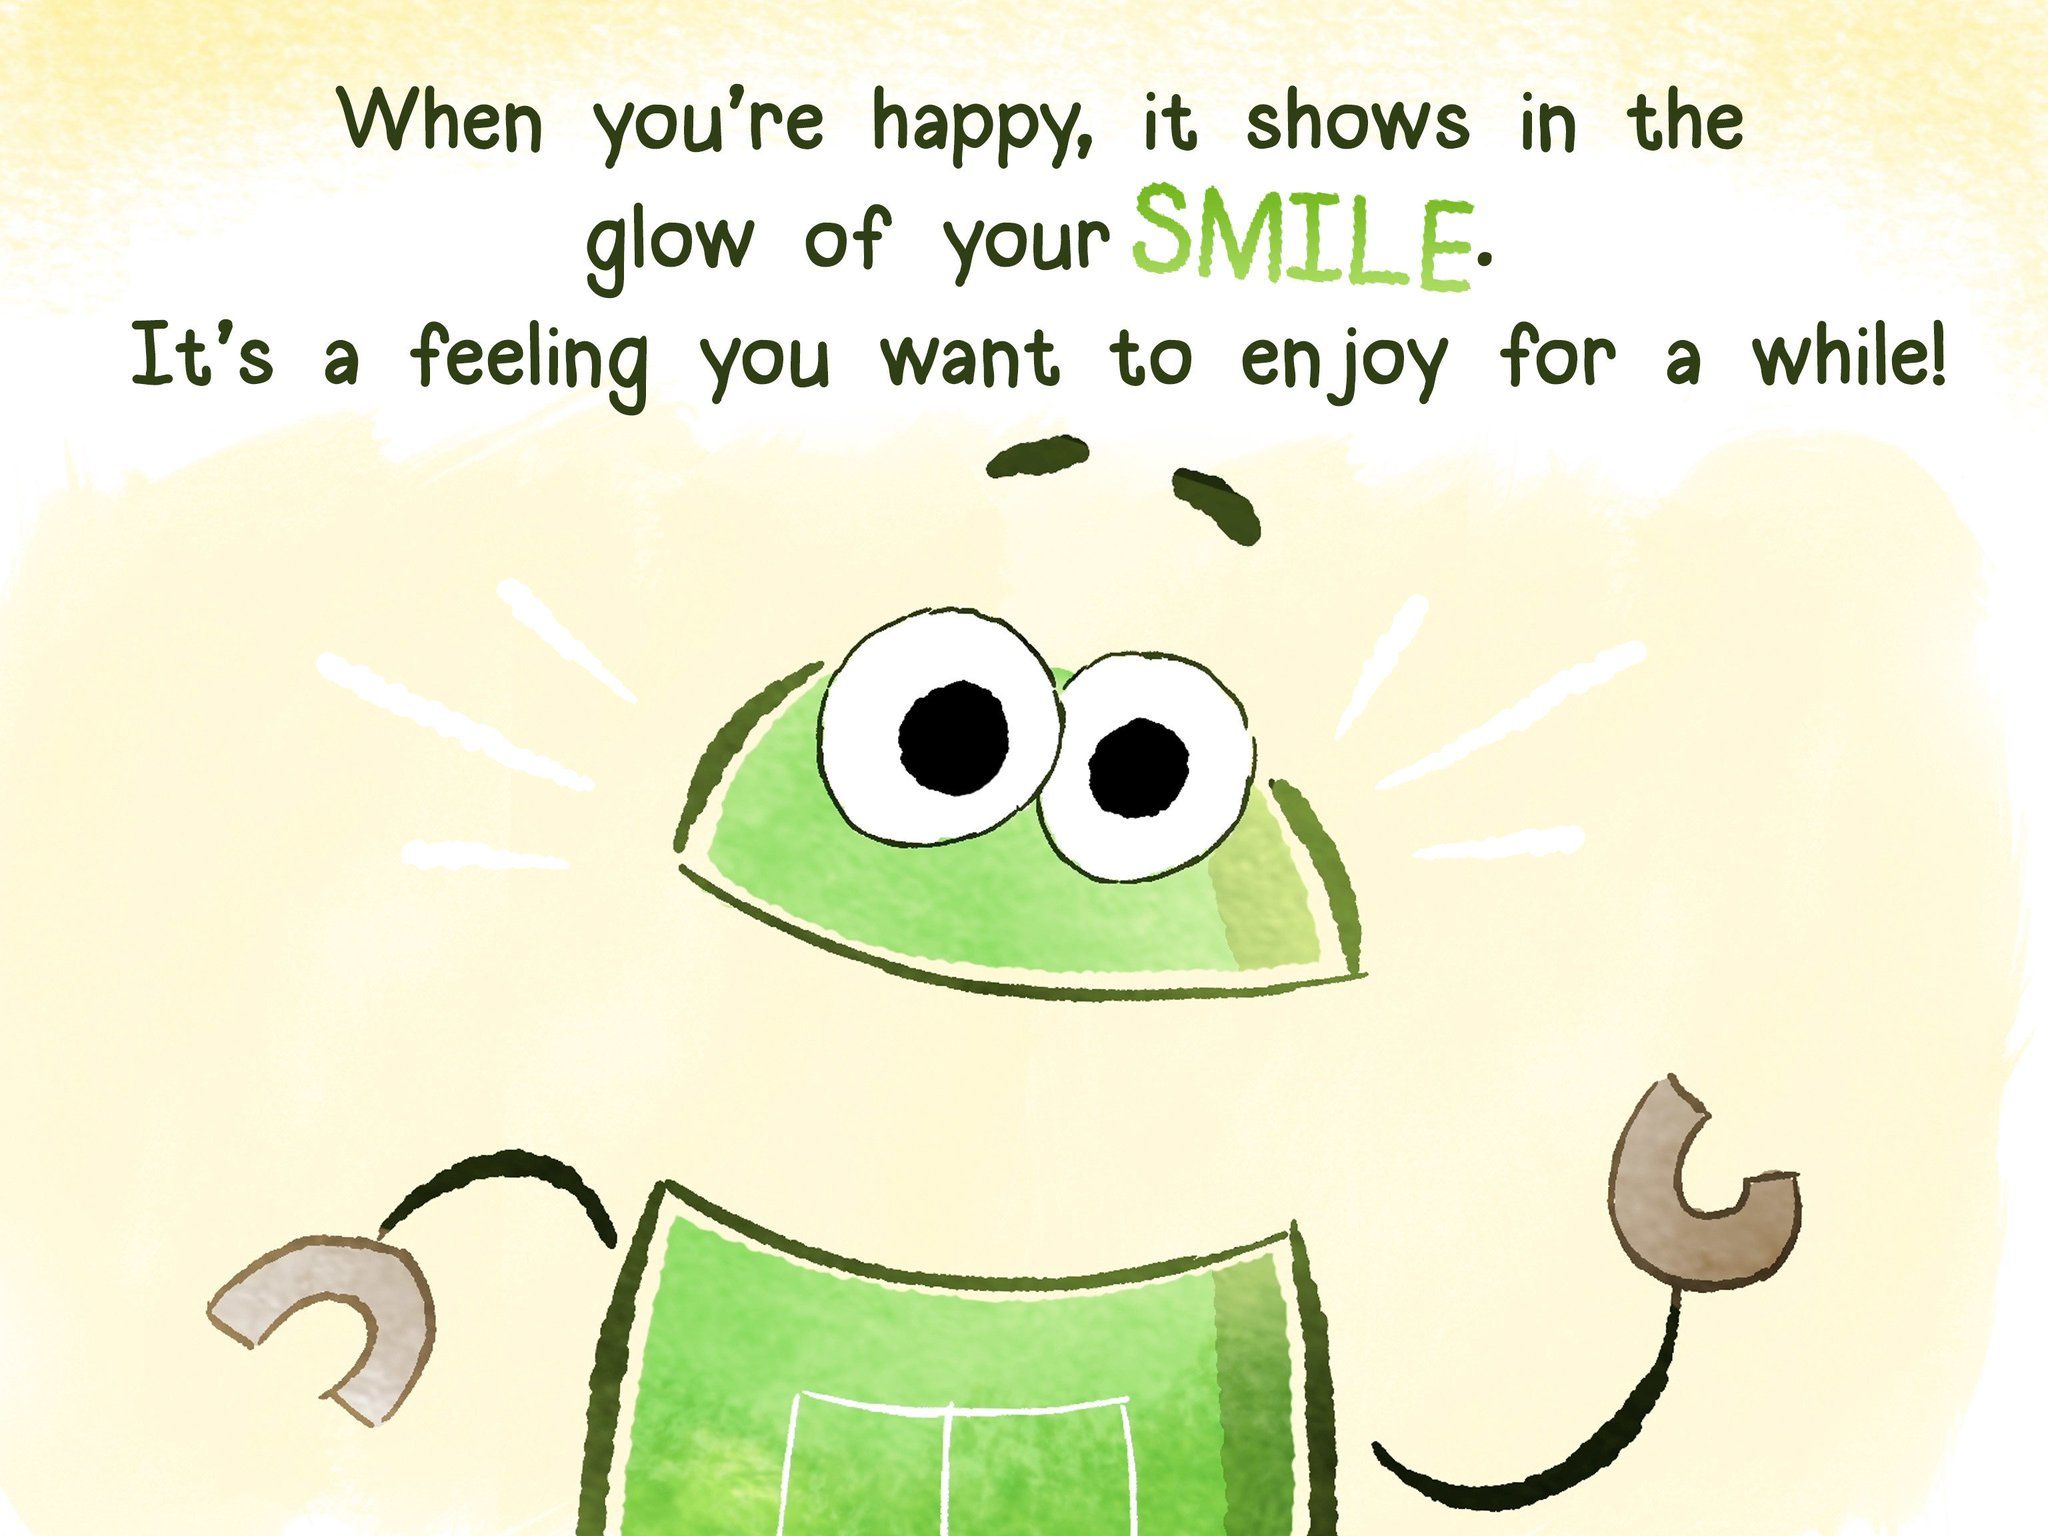 StoryBots all the great feelings, happy is the best! What makes you happy? → #emotions